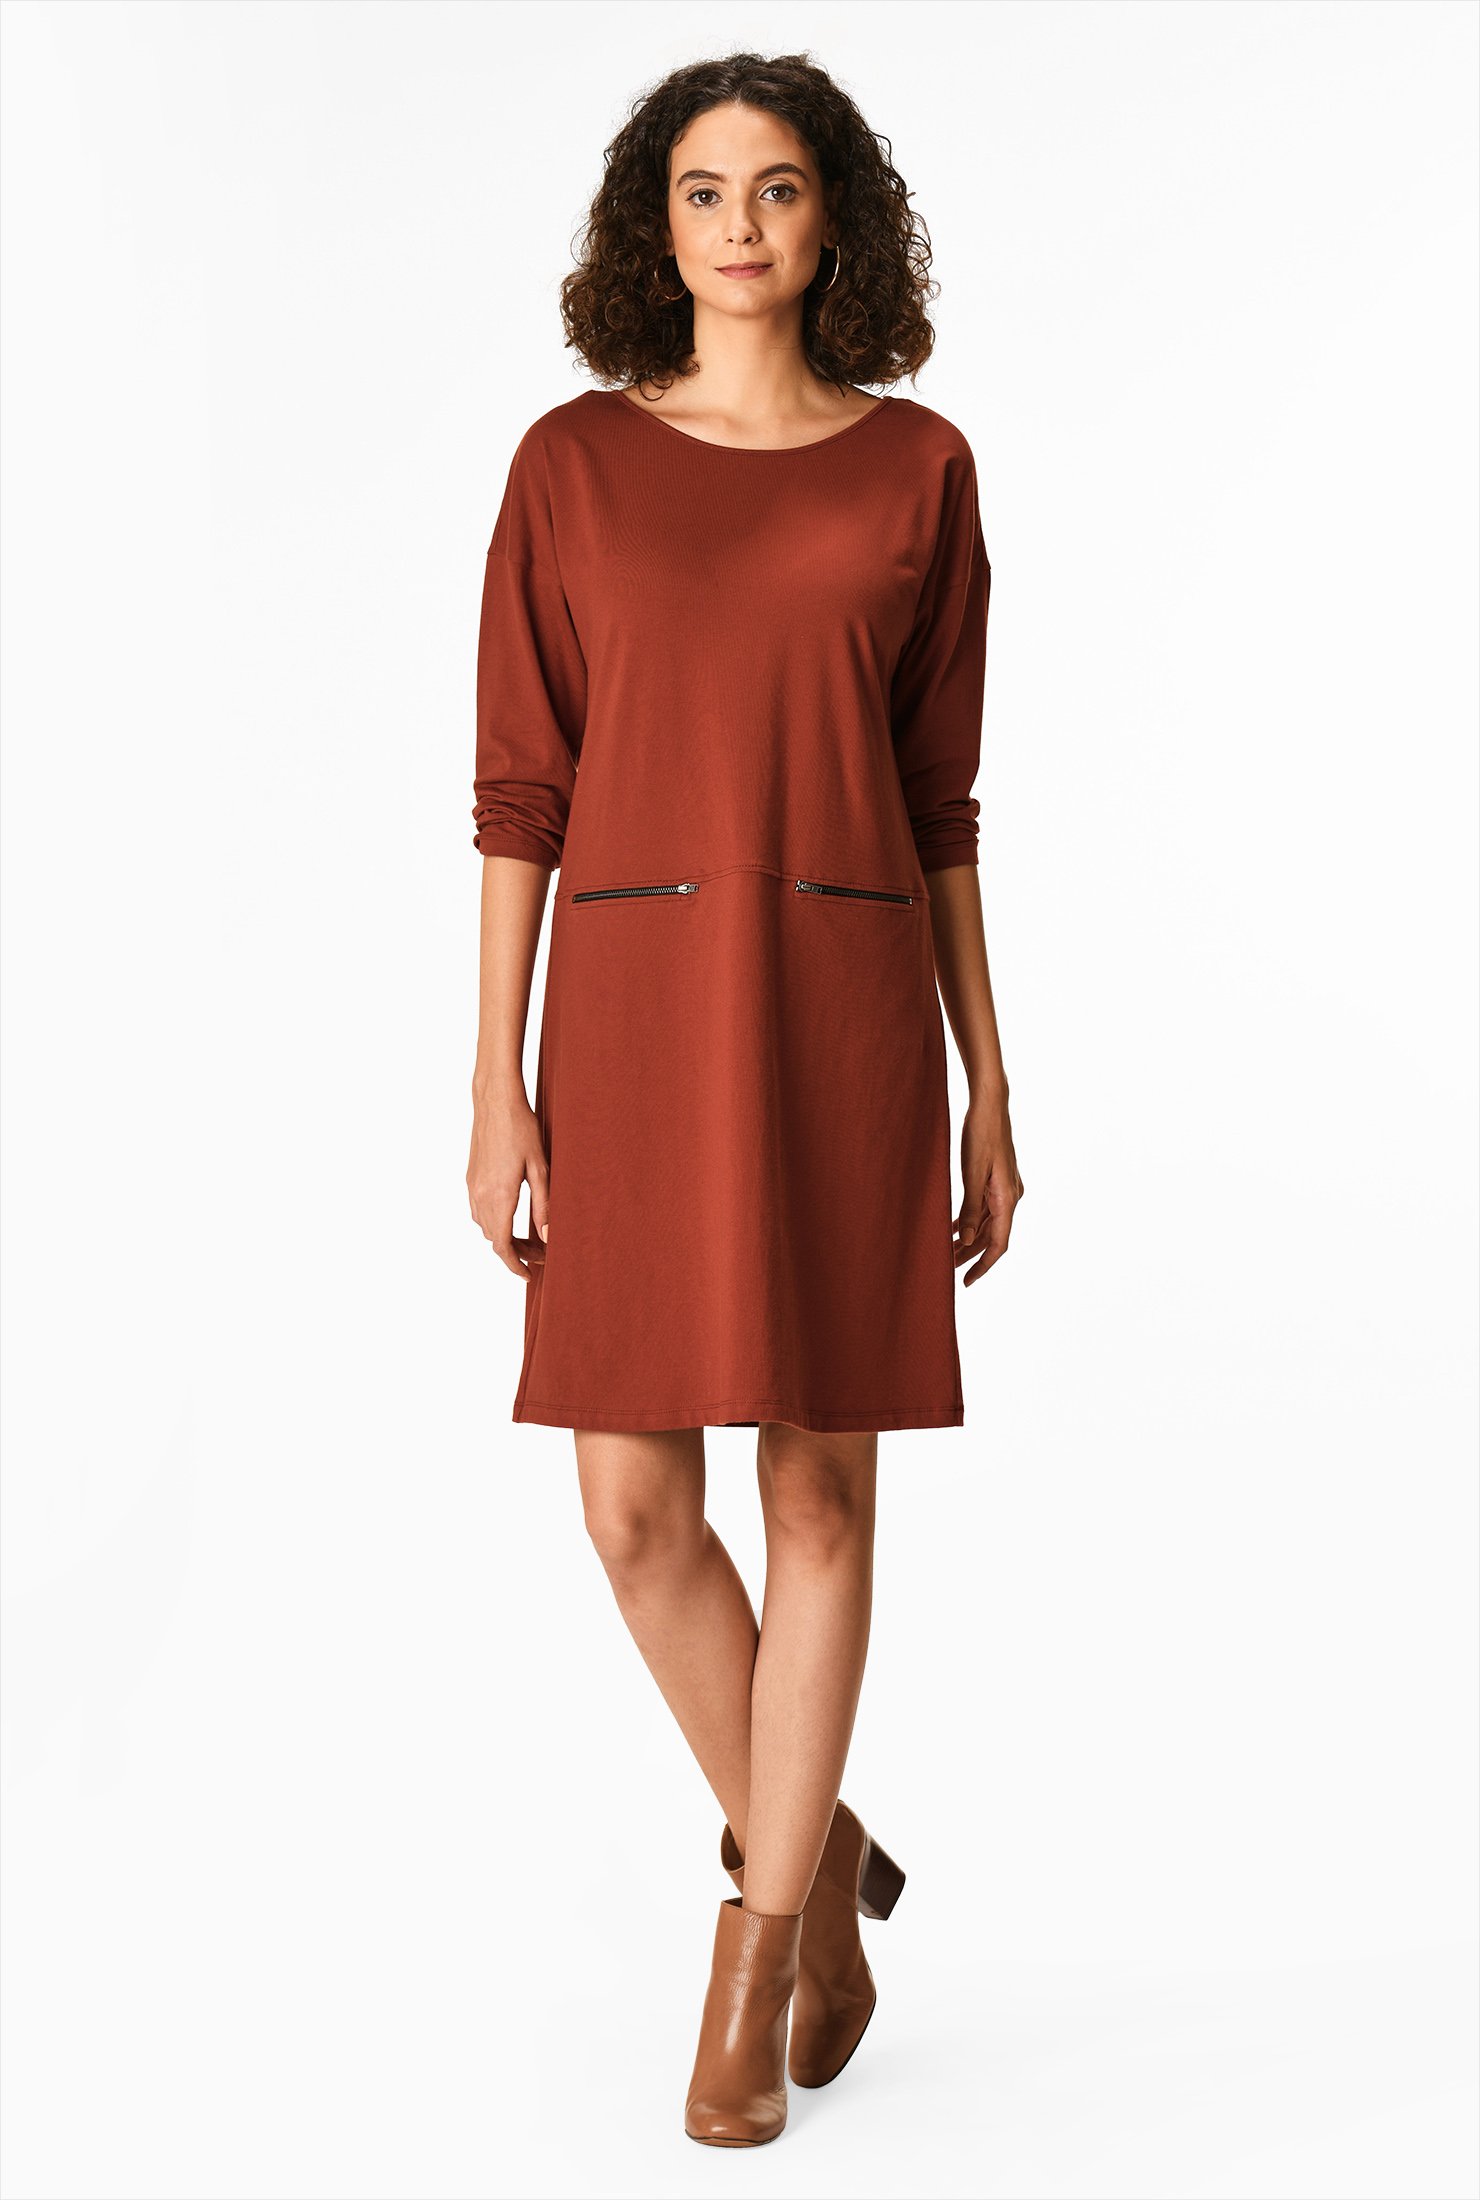 cotton shift dress with pockets